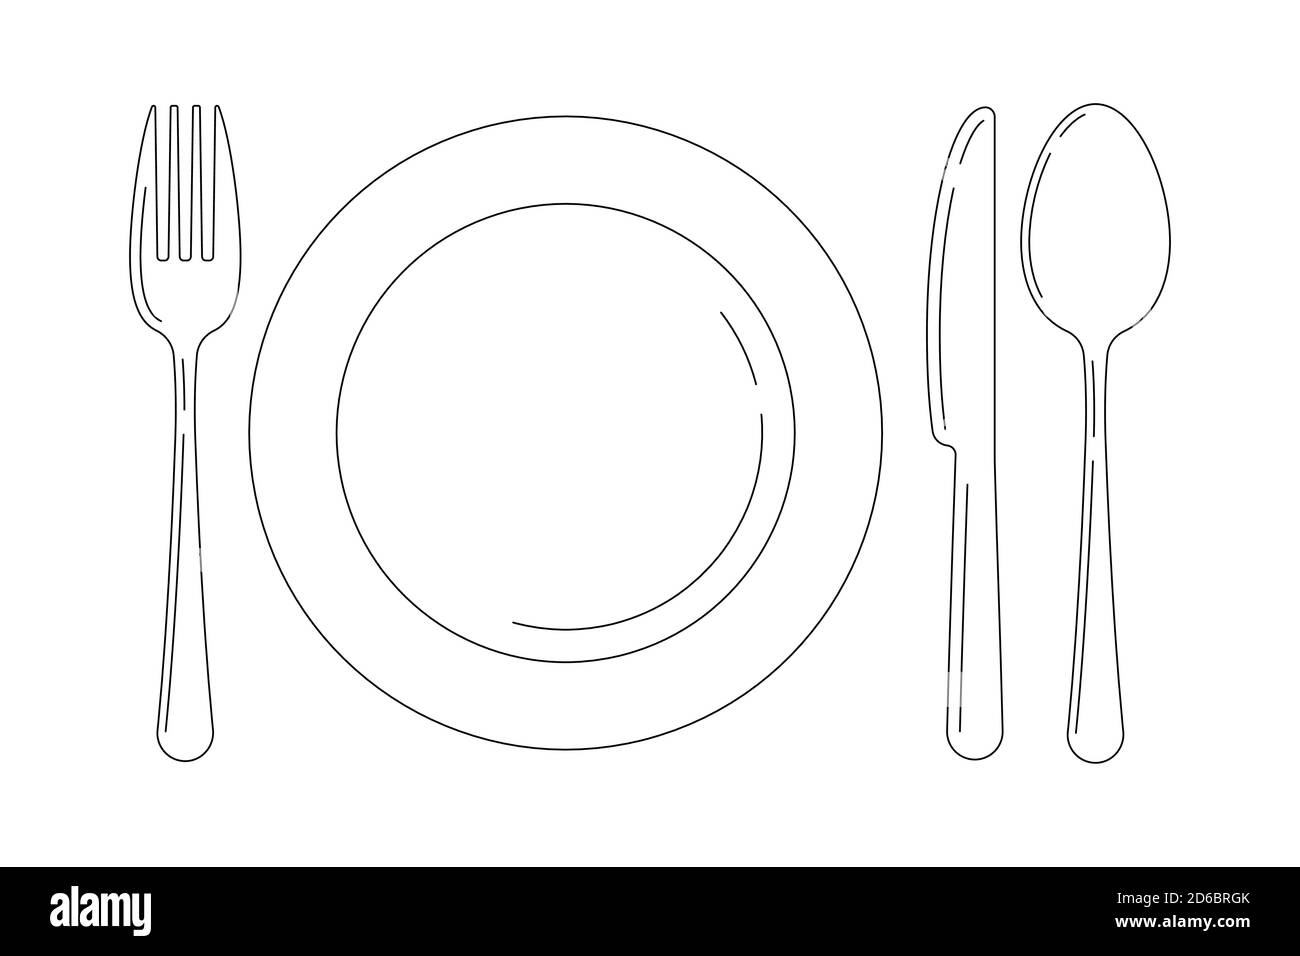 Silverware line art icon set isolated on white background. Stock Vector